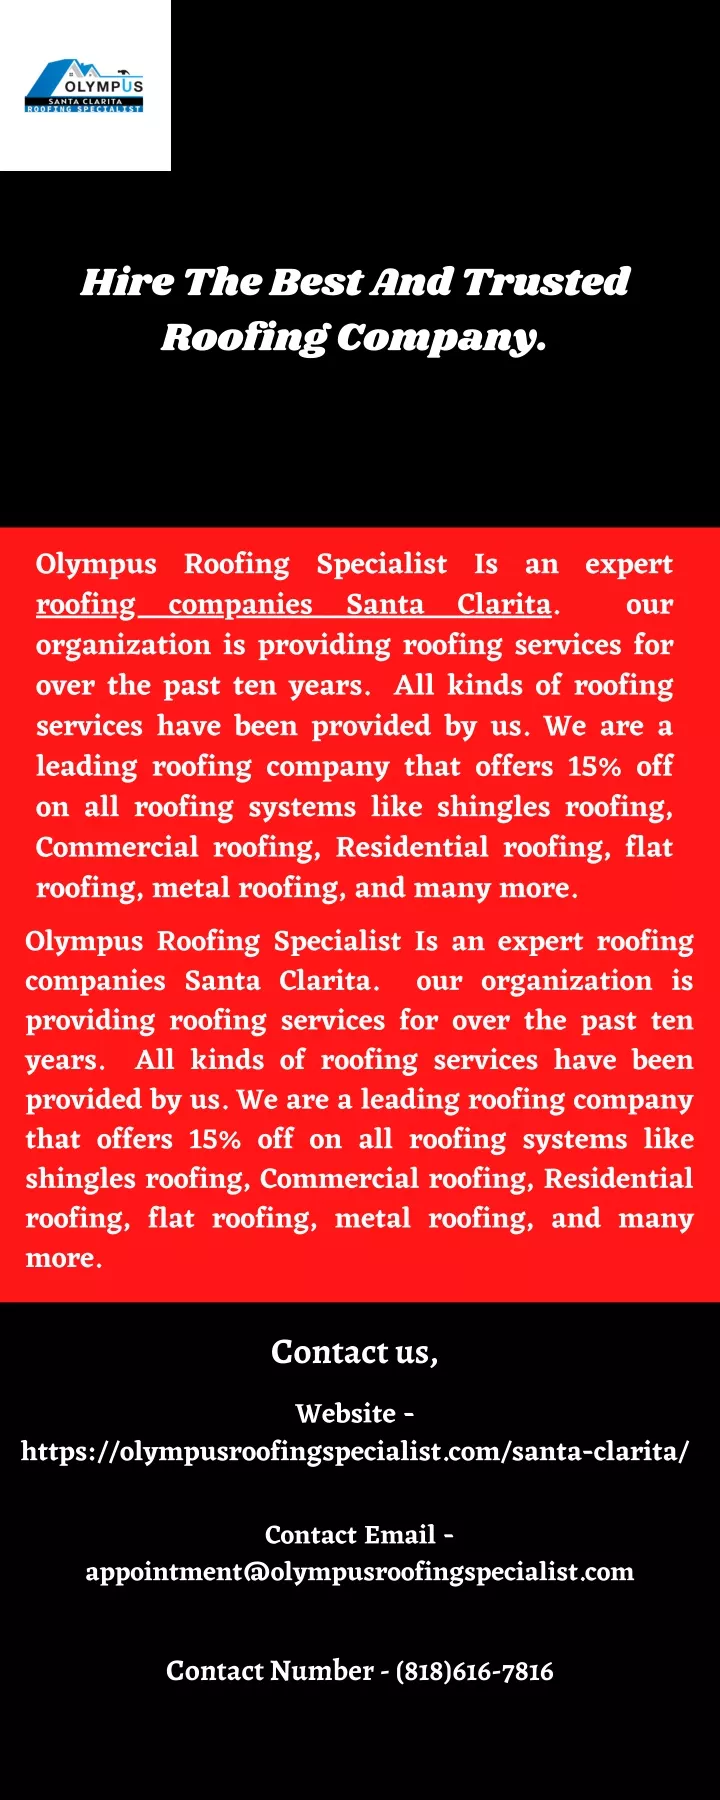 hire the best and trusted roofing company